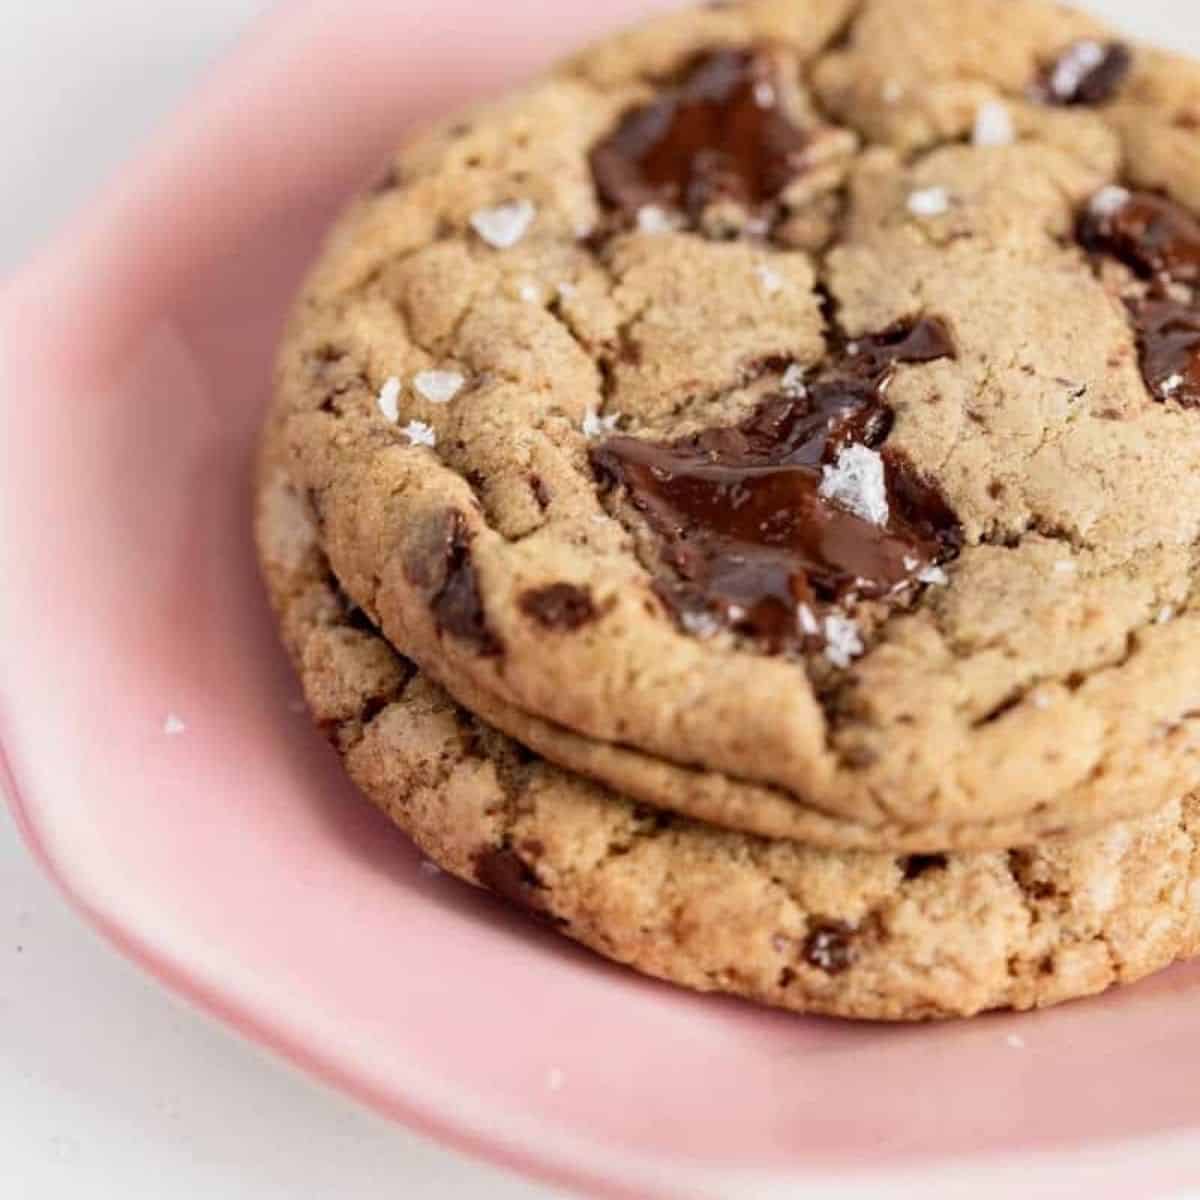 https://amandawilens.com/wp-content/uploads/2020/08/Featured-Image-perfect-chocolate-chip-cookies.jpg